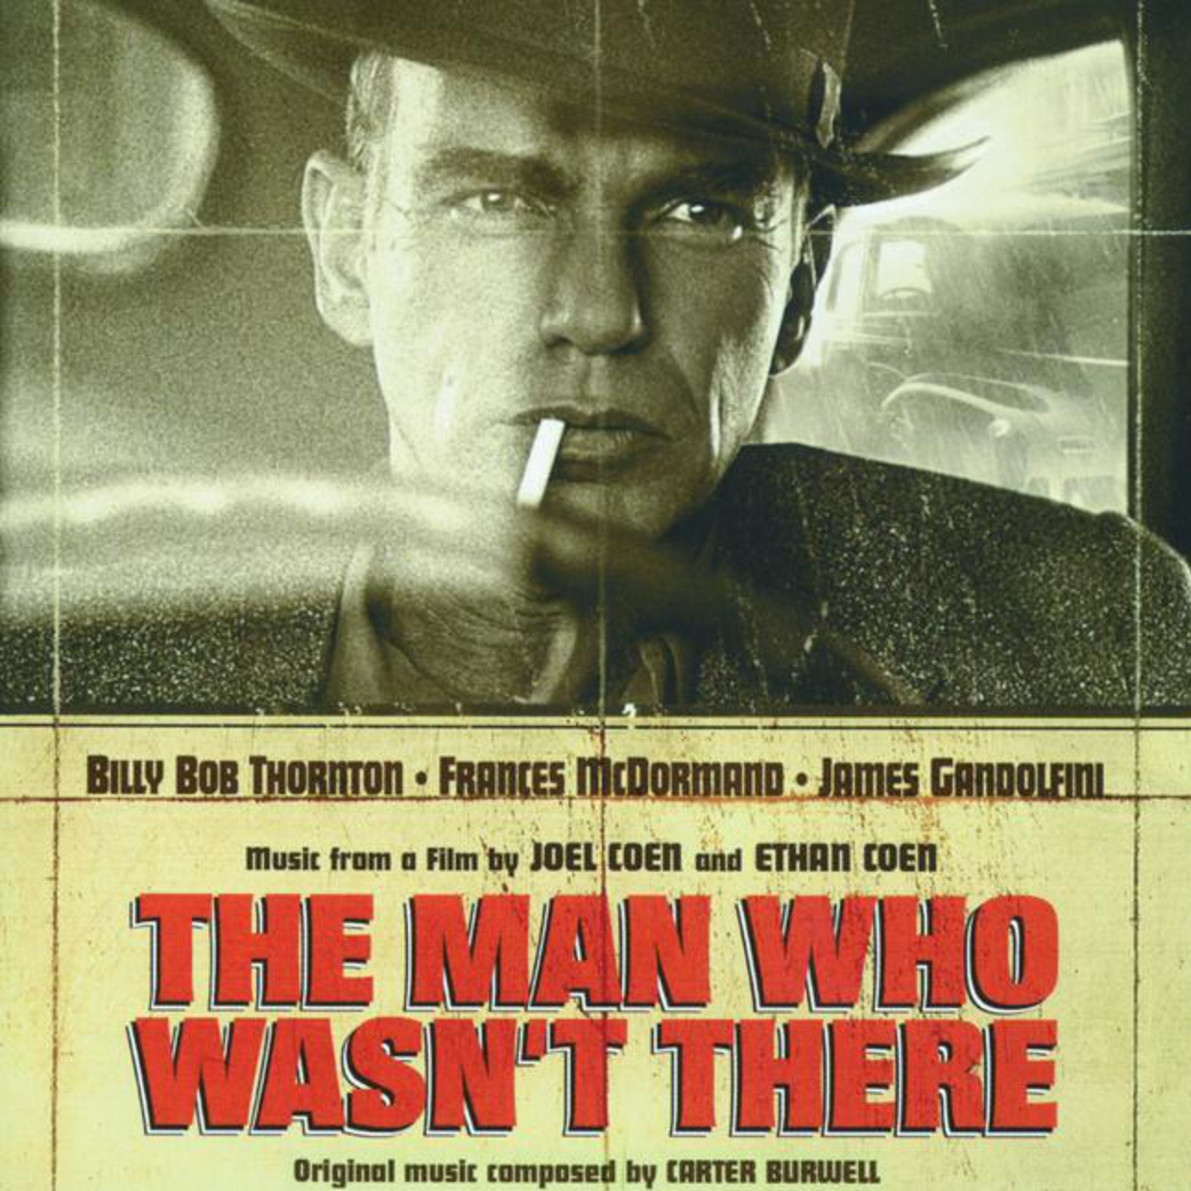 The Fight [The Man who wasn't there - Original Motion Picture Soundtrack]